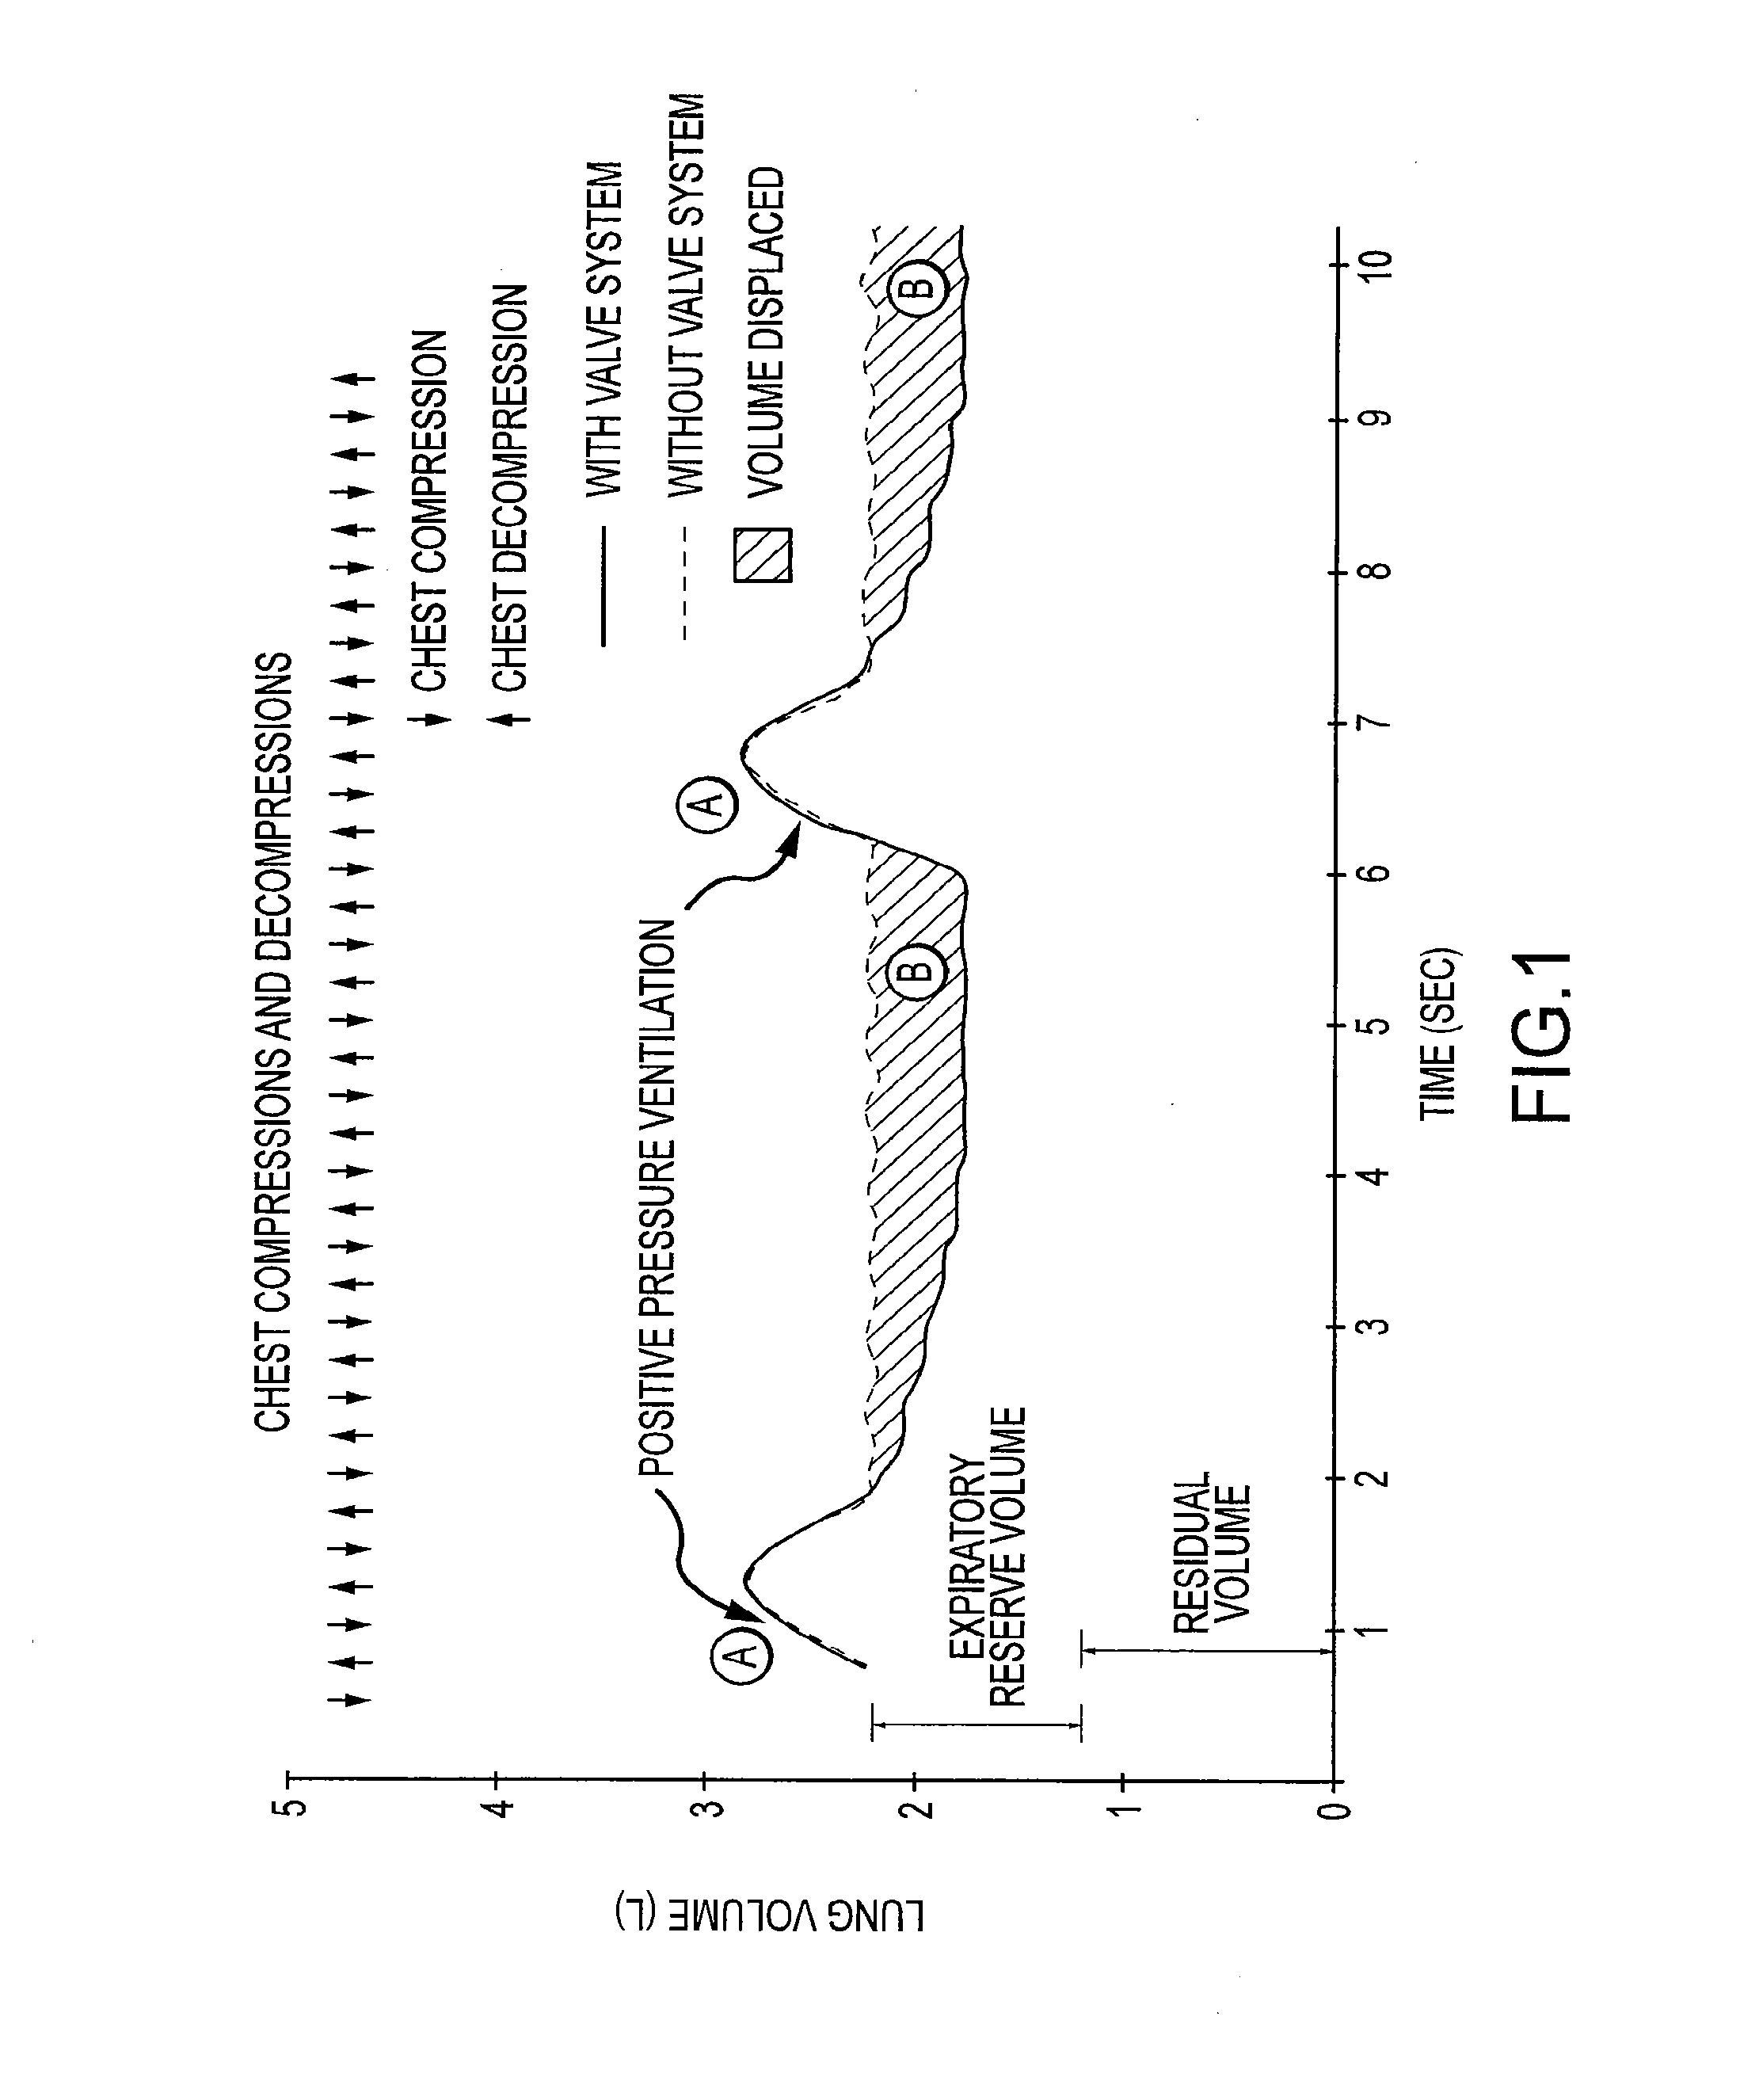 Volume exchanger valve system and method to increase circulation during CPR